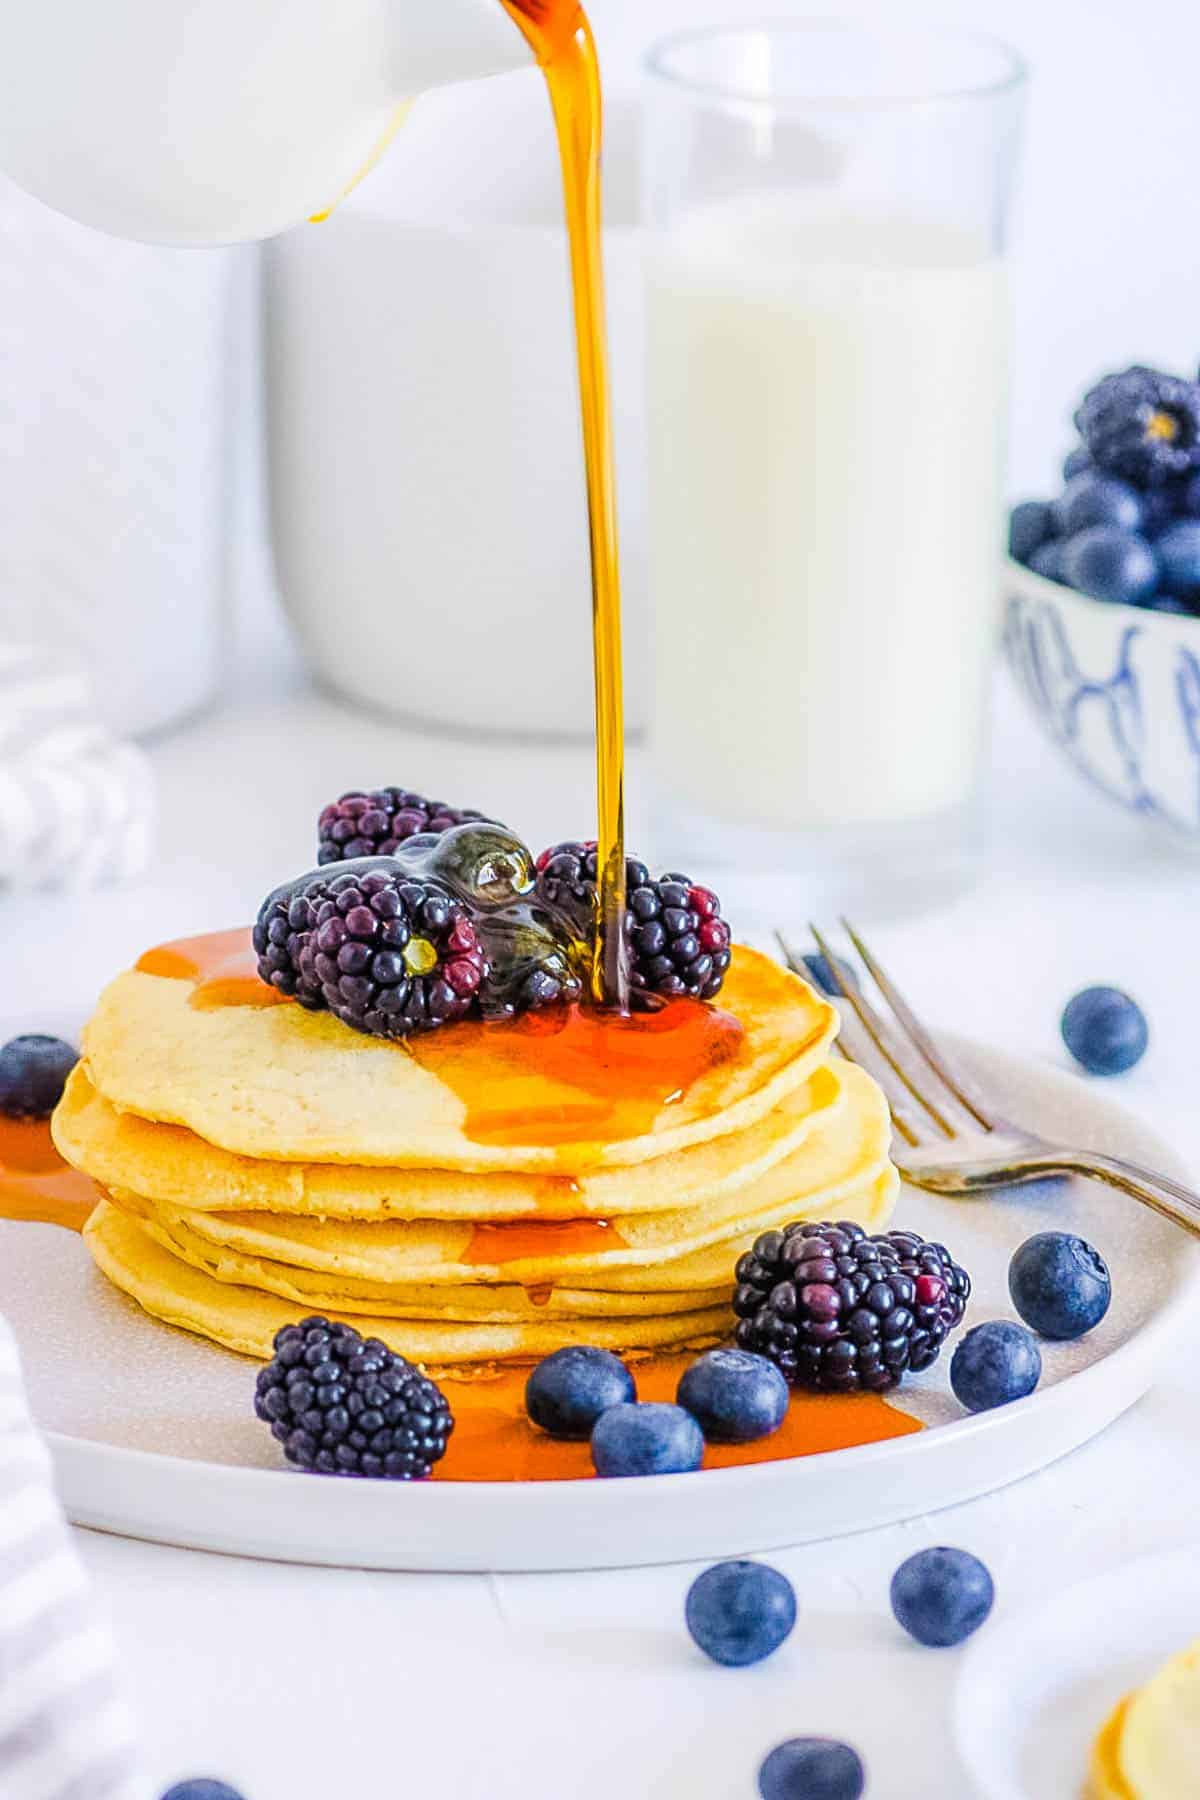 Maple syrup pouring onto coconut flour pancakes stacked on a white plate with blackberries and blueberries.